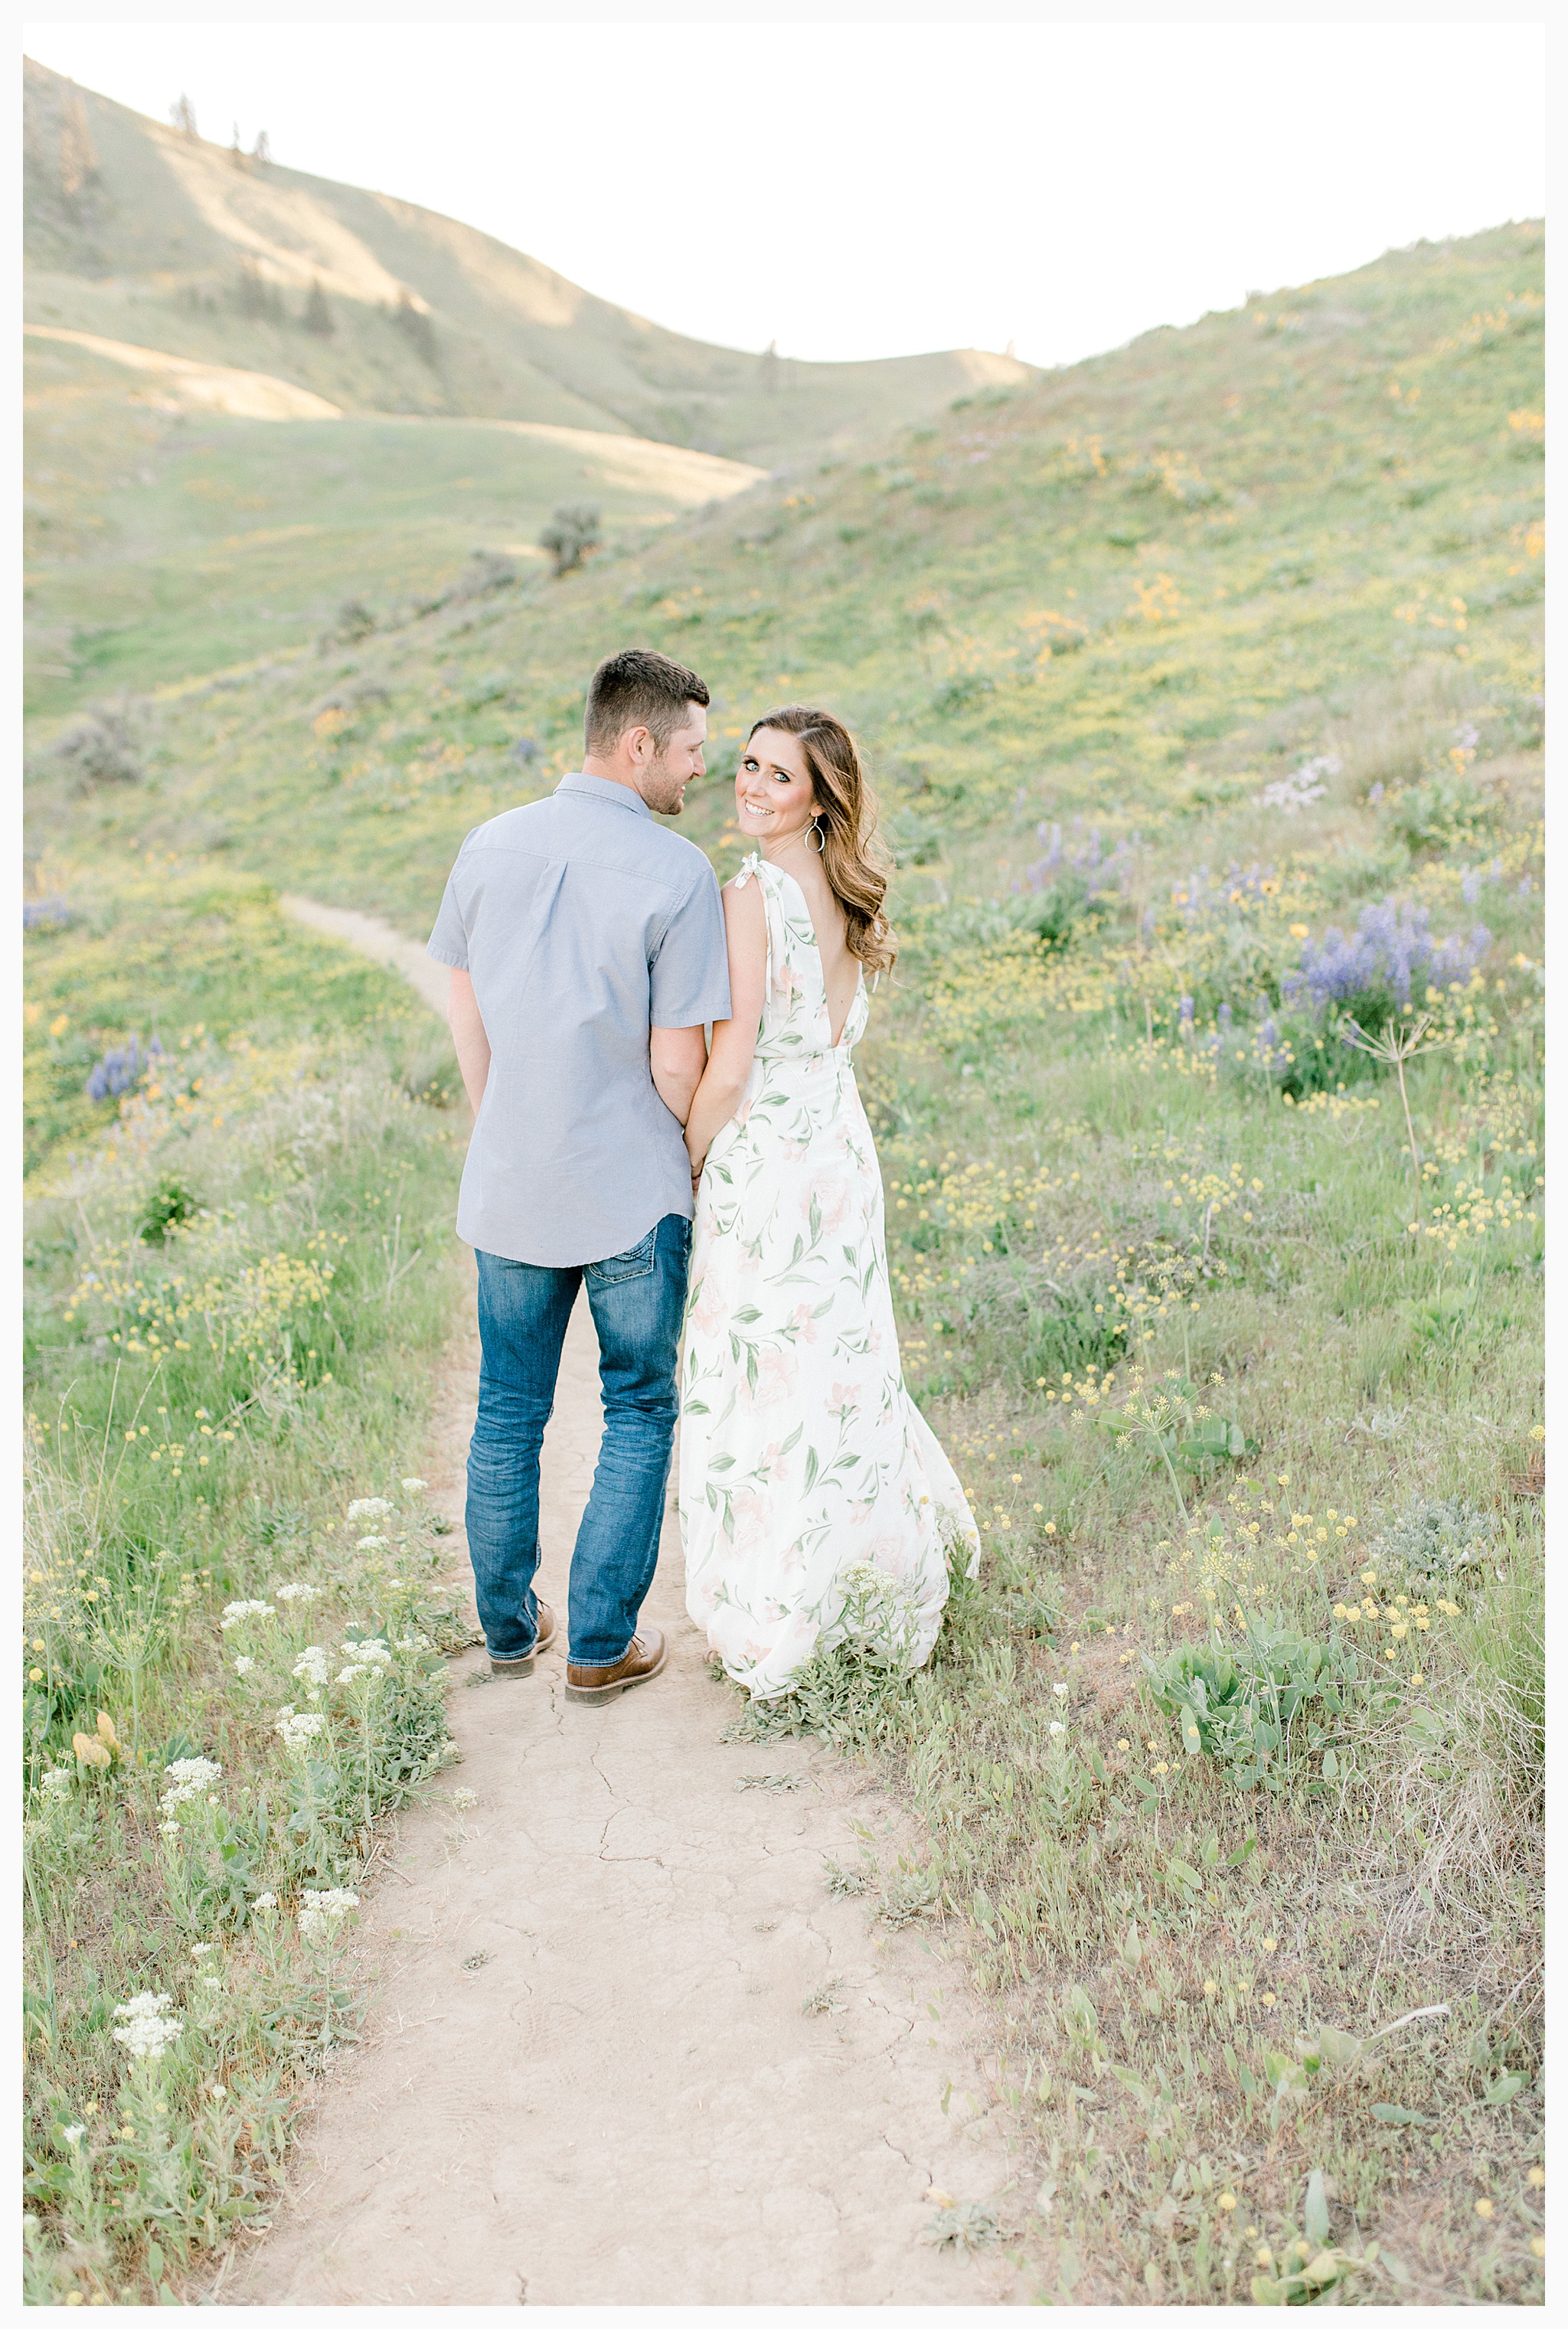 Engagement session amongst the wildflowers in Wenatchee, Washington | Engagement Session Outfit Inspiration for Wedding Photography with Emma Rose Company | Light and Airy PNW Photographer, Seattle Bride_0014.jpg